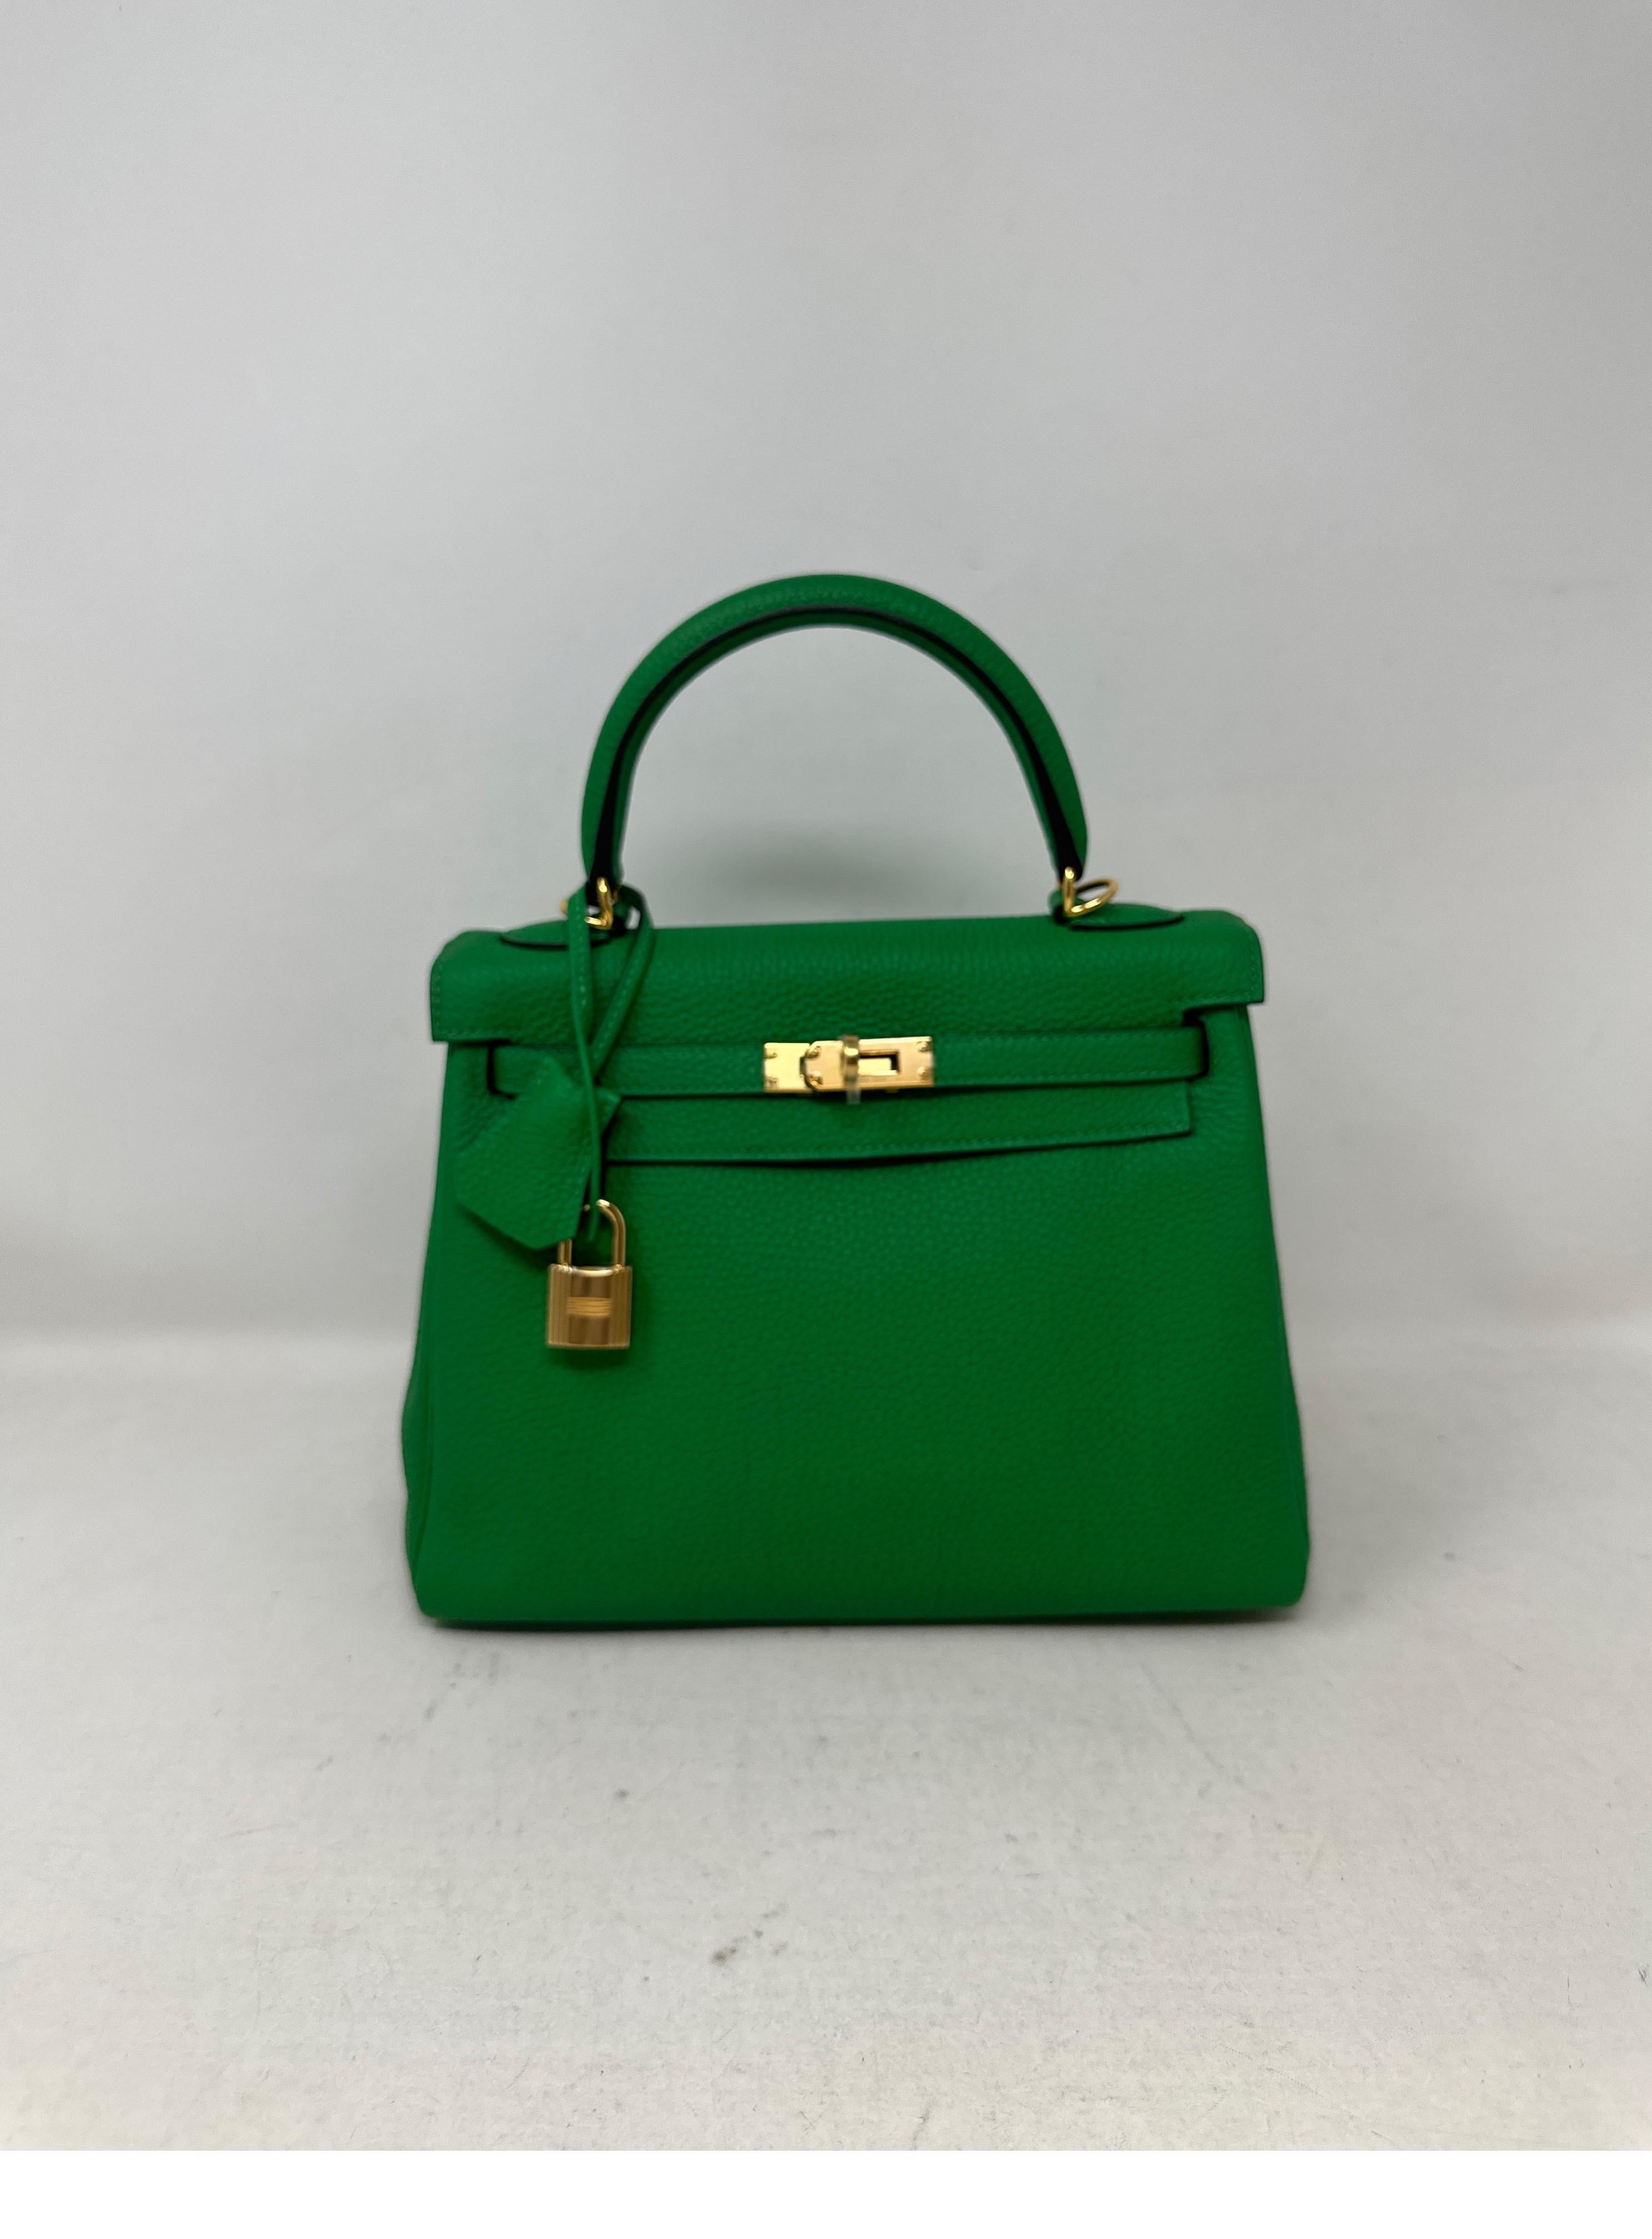 Hermes Bamboo Togo Kelly 25 Bag  In Excellent Condition For Sale In Athens, GA